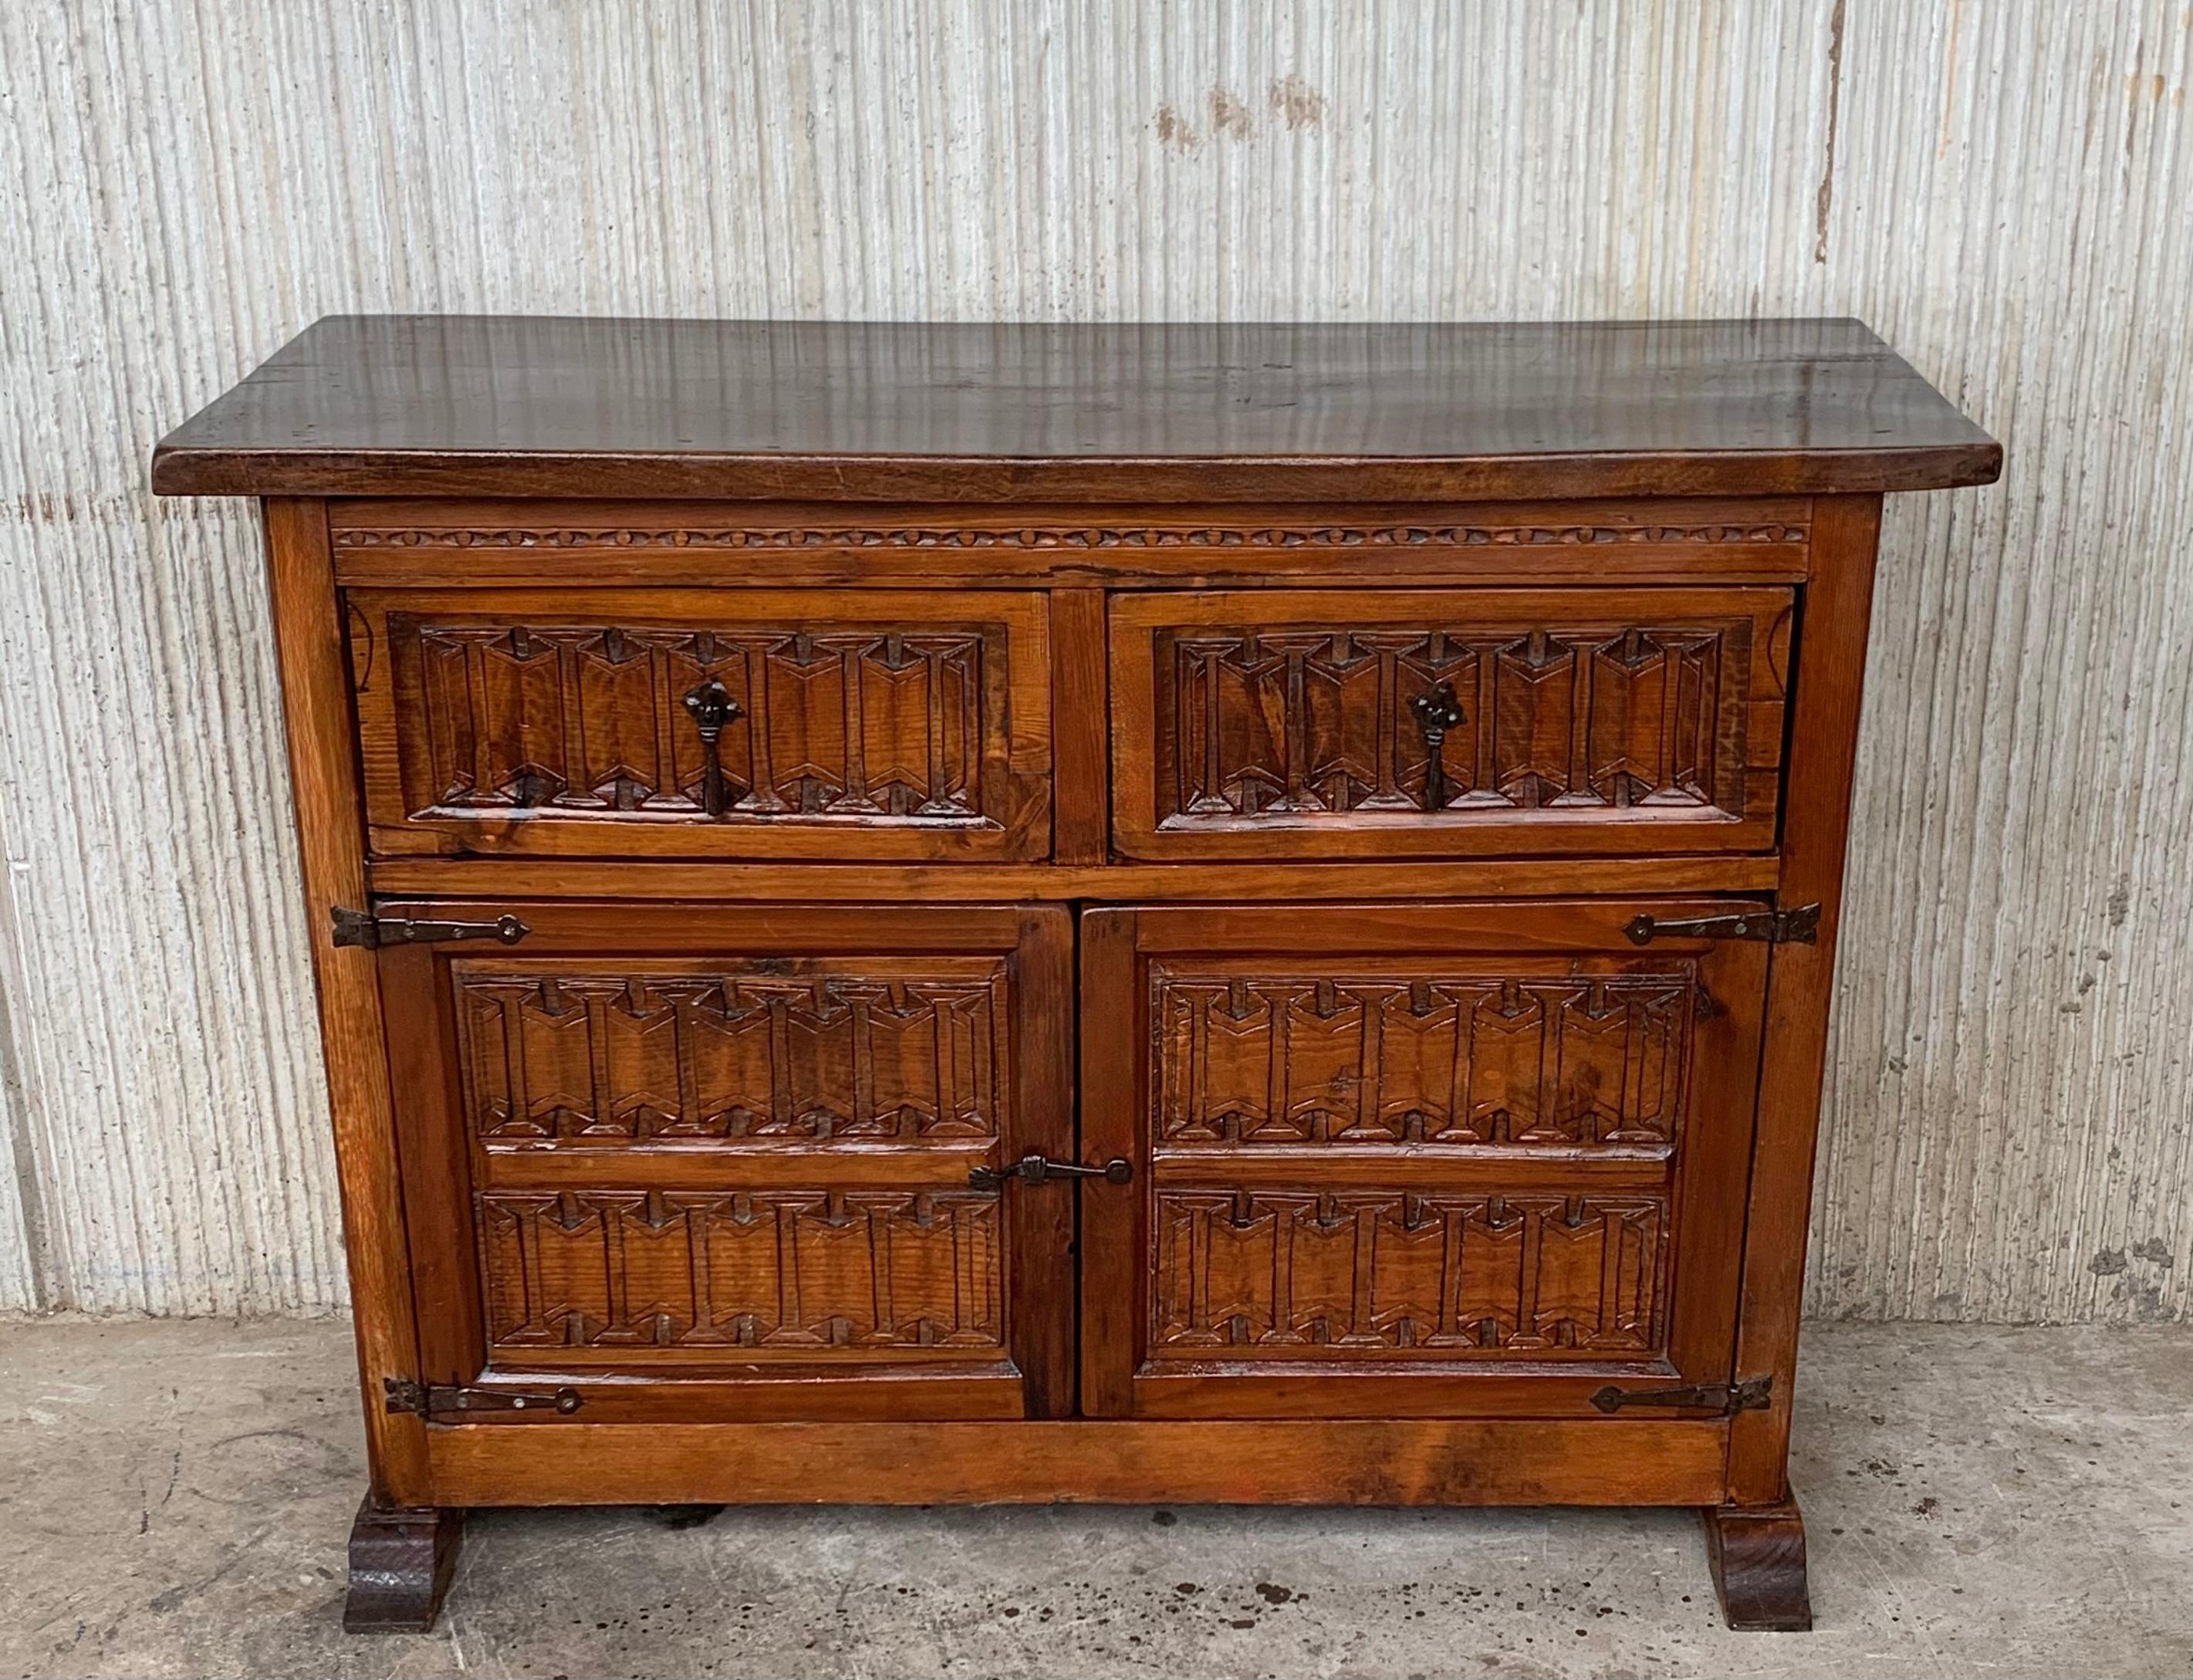 19th century Spanish carved pine cabinet or console with two drawers and two doors with original iron hardware.
You can use like a commode or chest of drawers
This elegant antique walnut console was crafted in Spain, circa 1900. The chest with